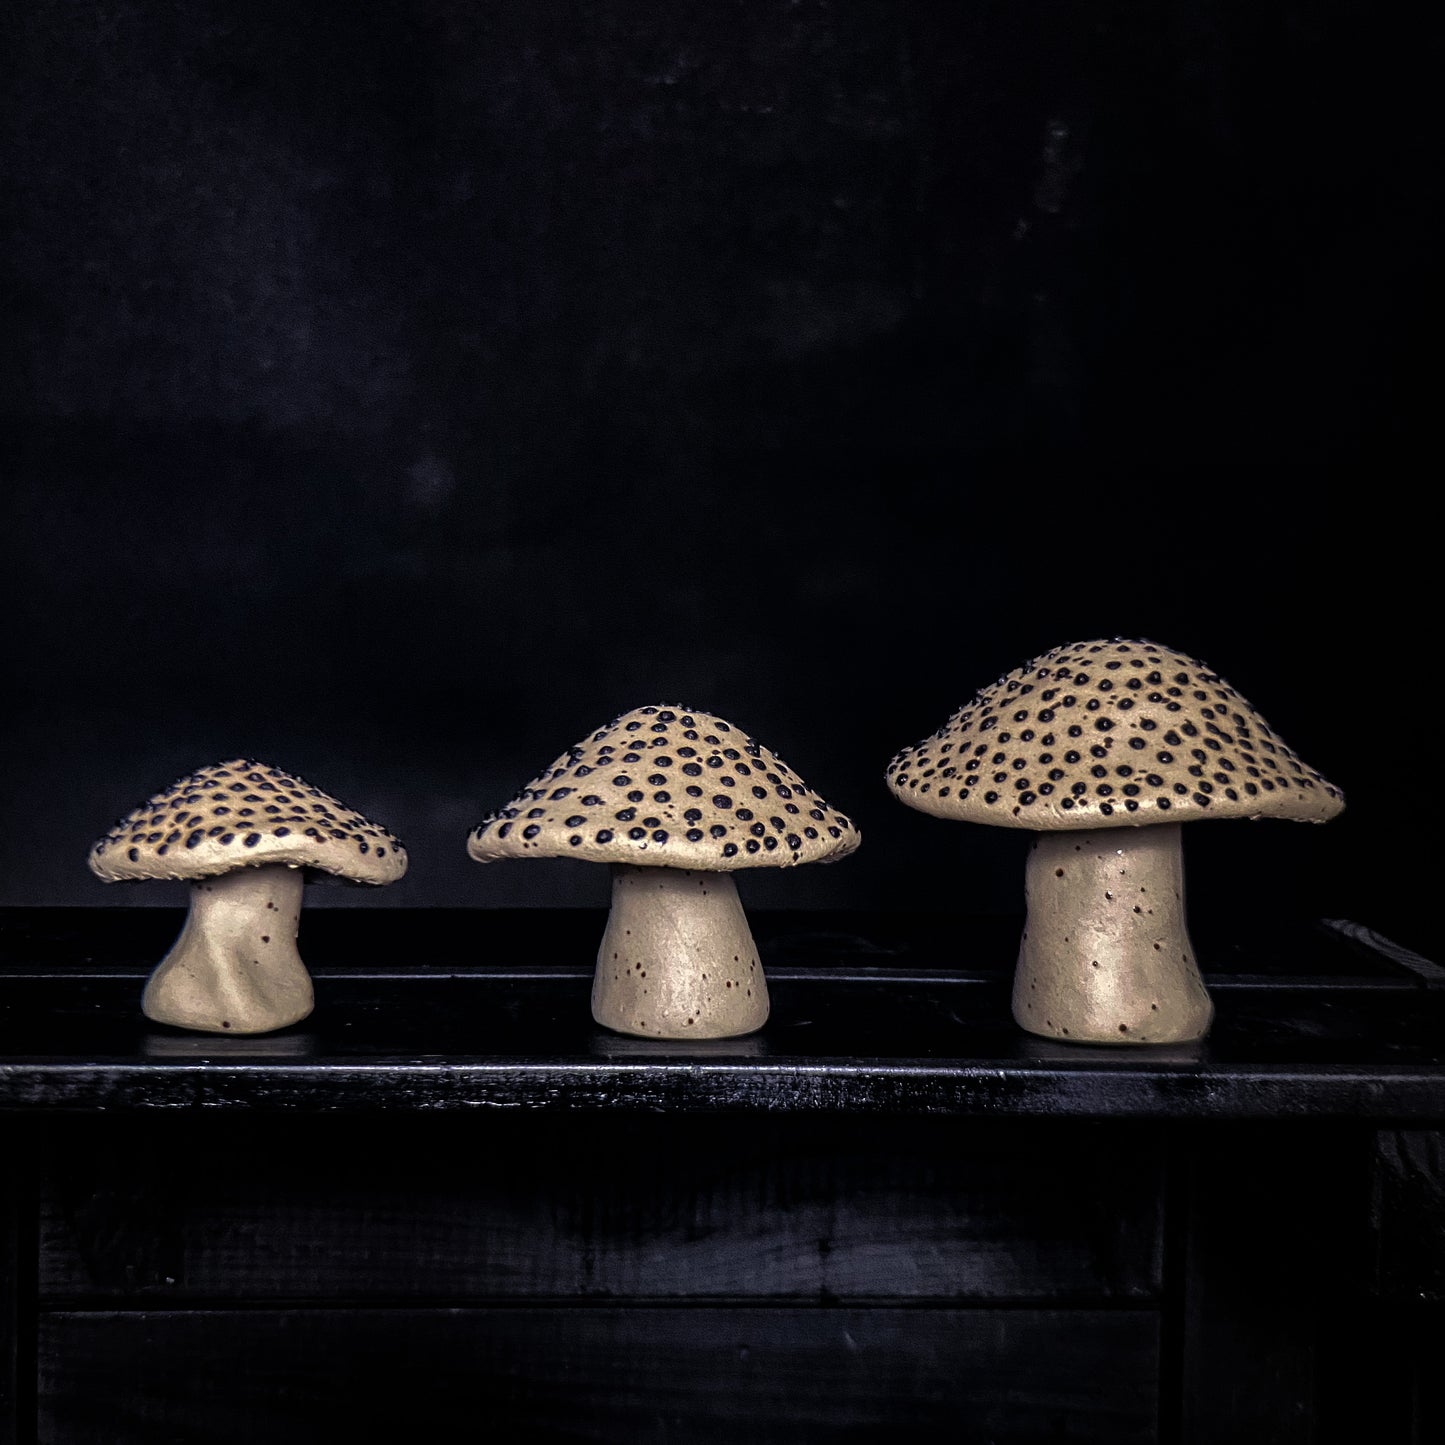 Mushroom - Yellow spotted clay with black spots - Various sizes